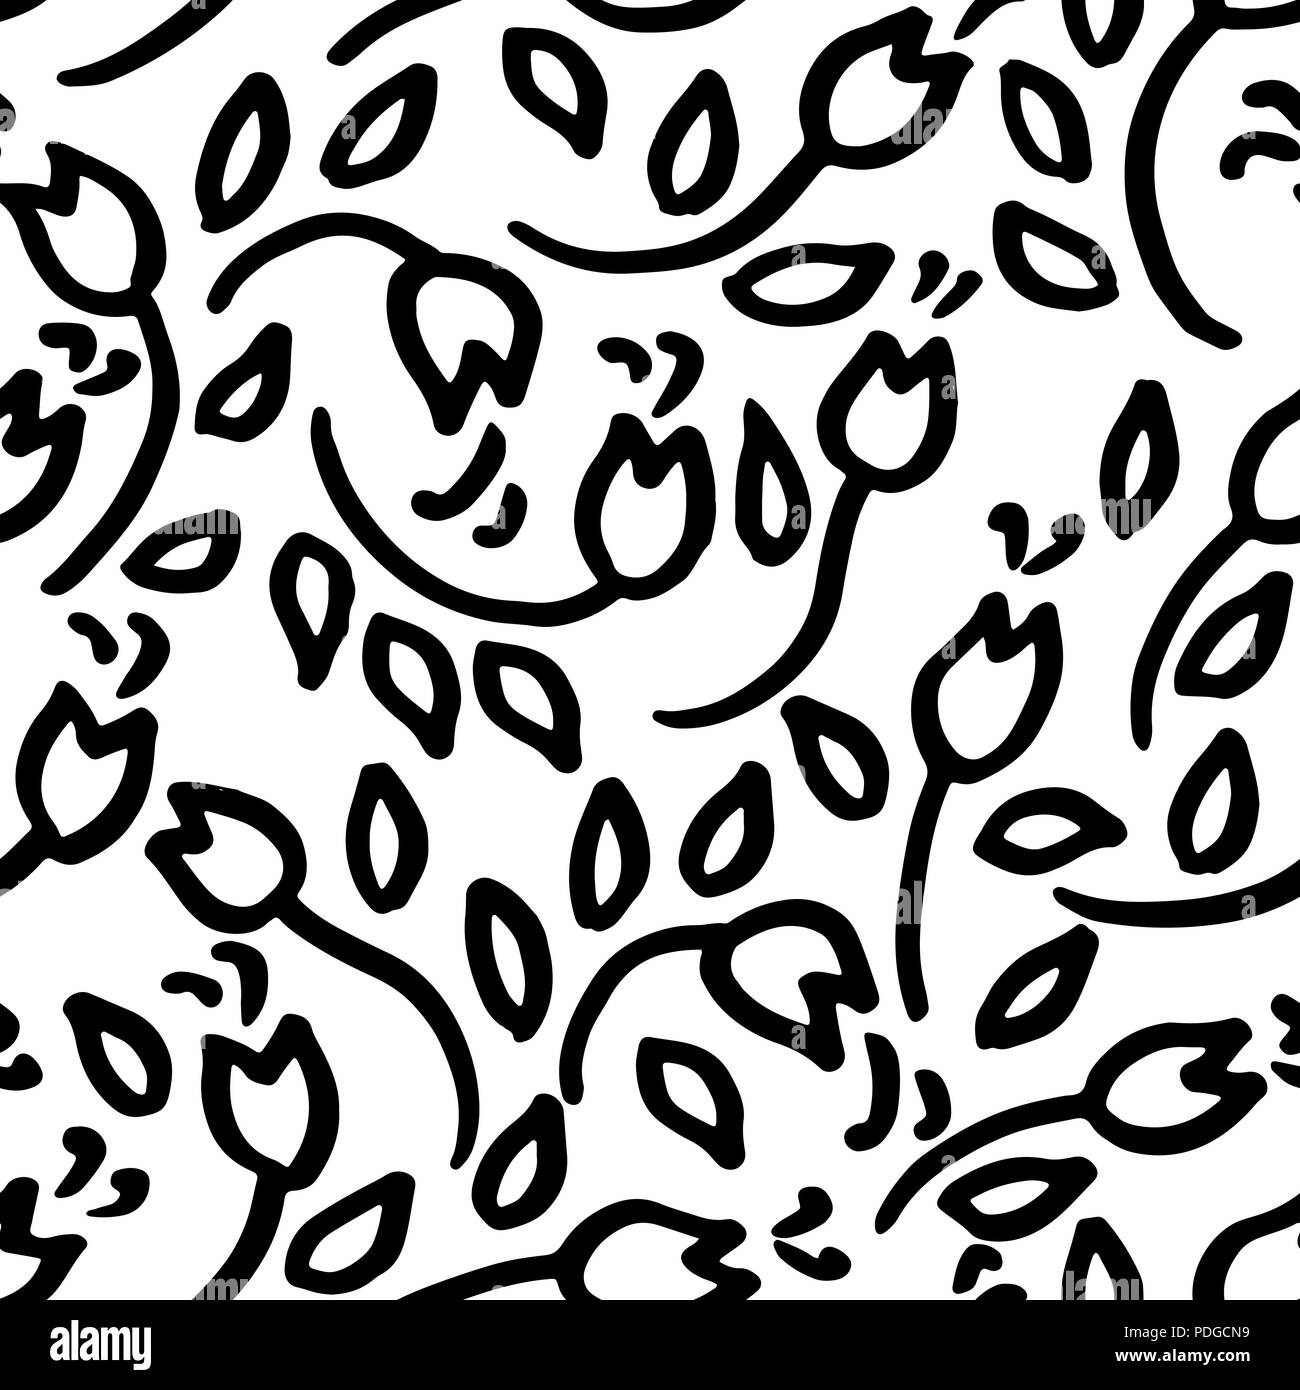 Simple Black And White Flowers Seamless Pattern Vector Illustration Stock Vector Image Art Alamy,Mediterranean House Designs